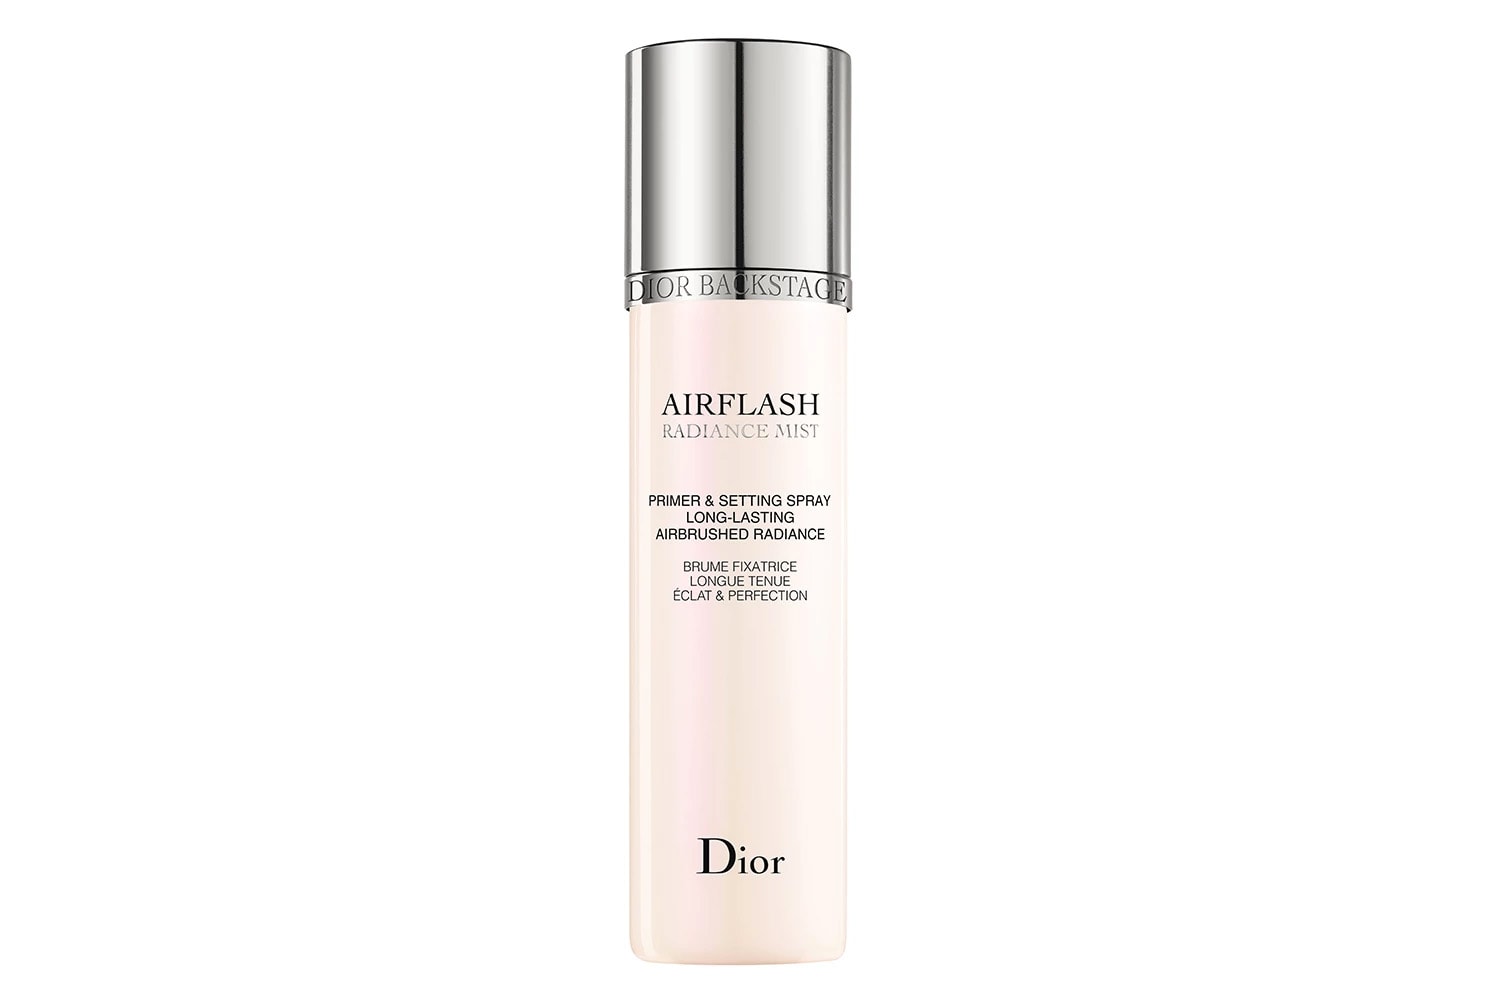 Dior Backstage Airflash Spray Foundation Makeup Beauty Nude Lightweight New